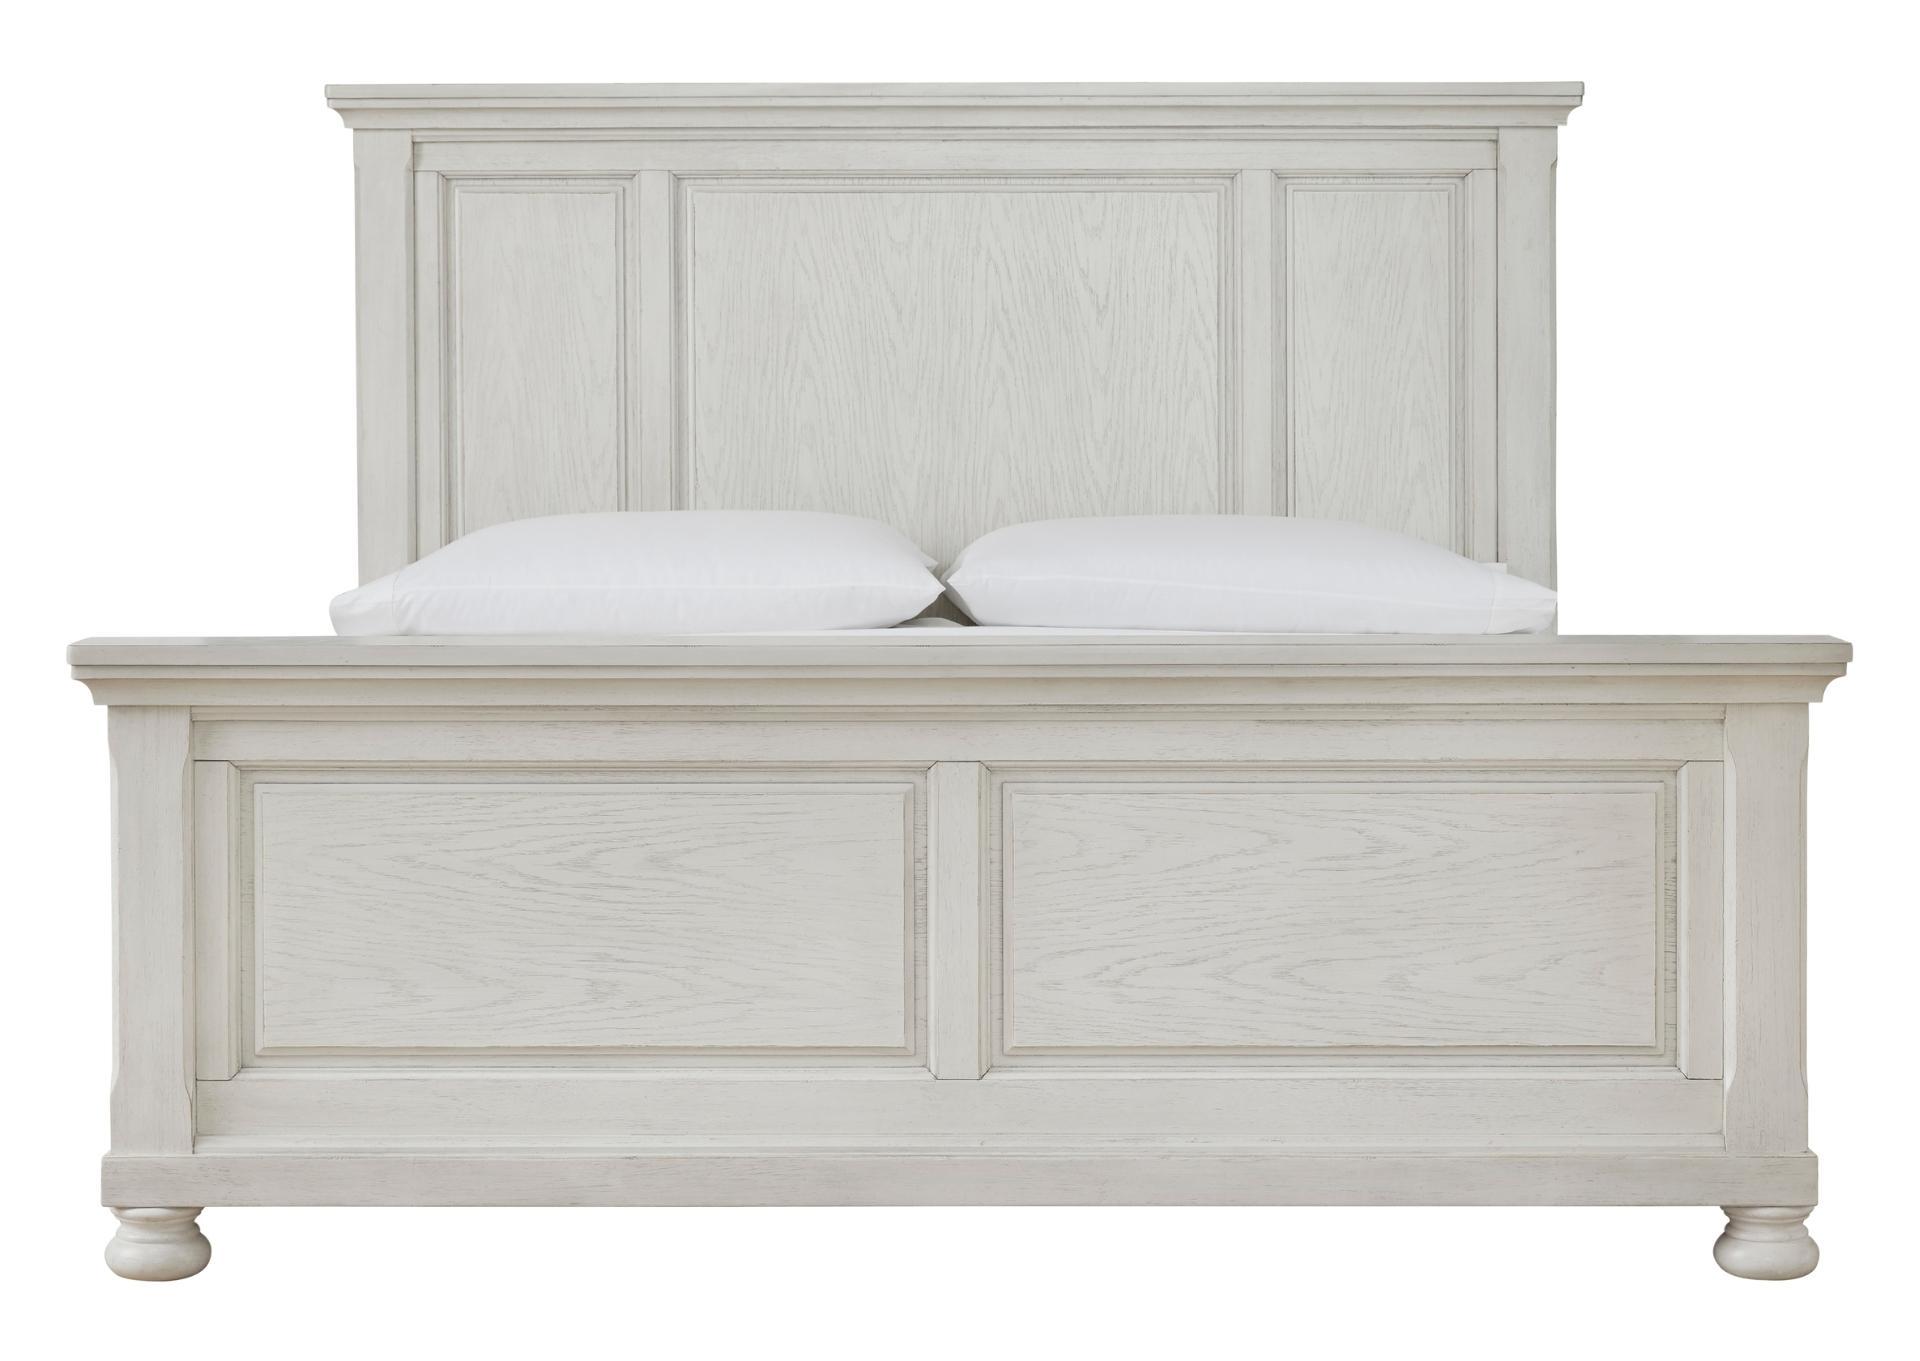 ROBBINSDALE QUEEN PANEL BED,ASHLEY FURNITURE INC.